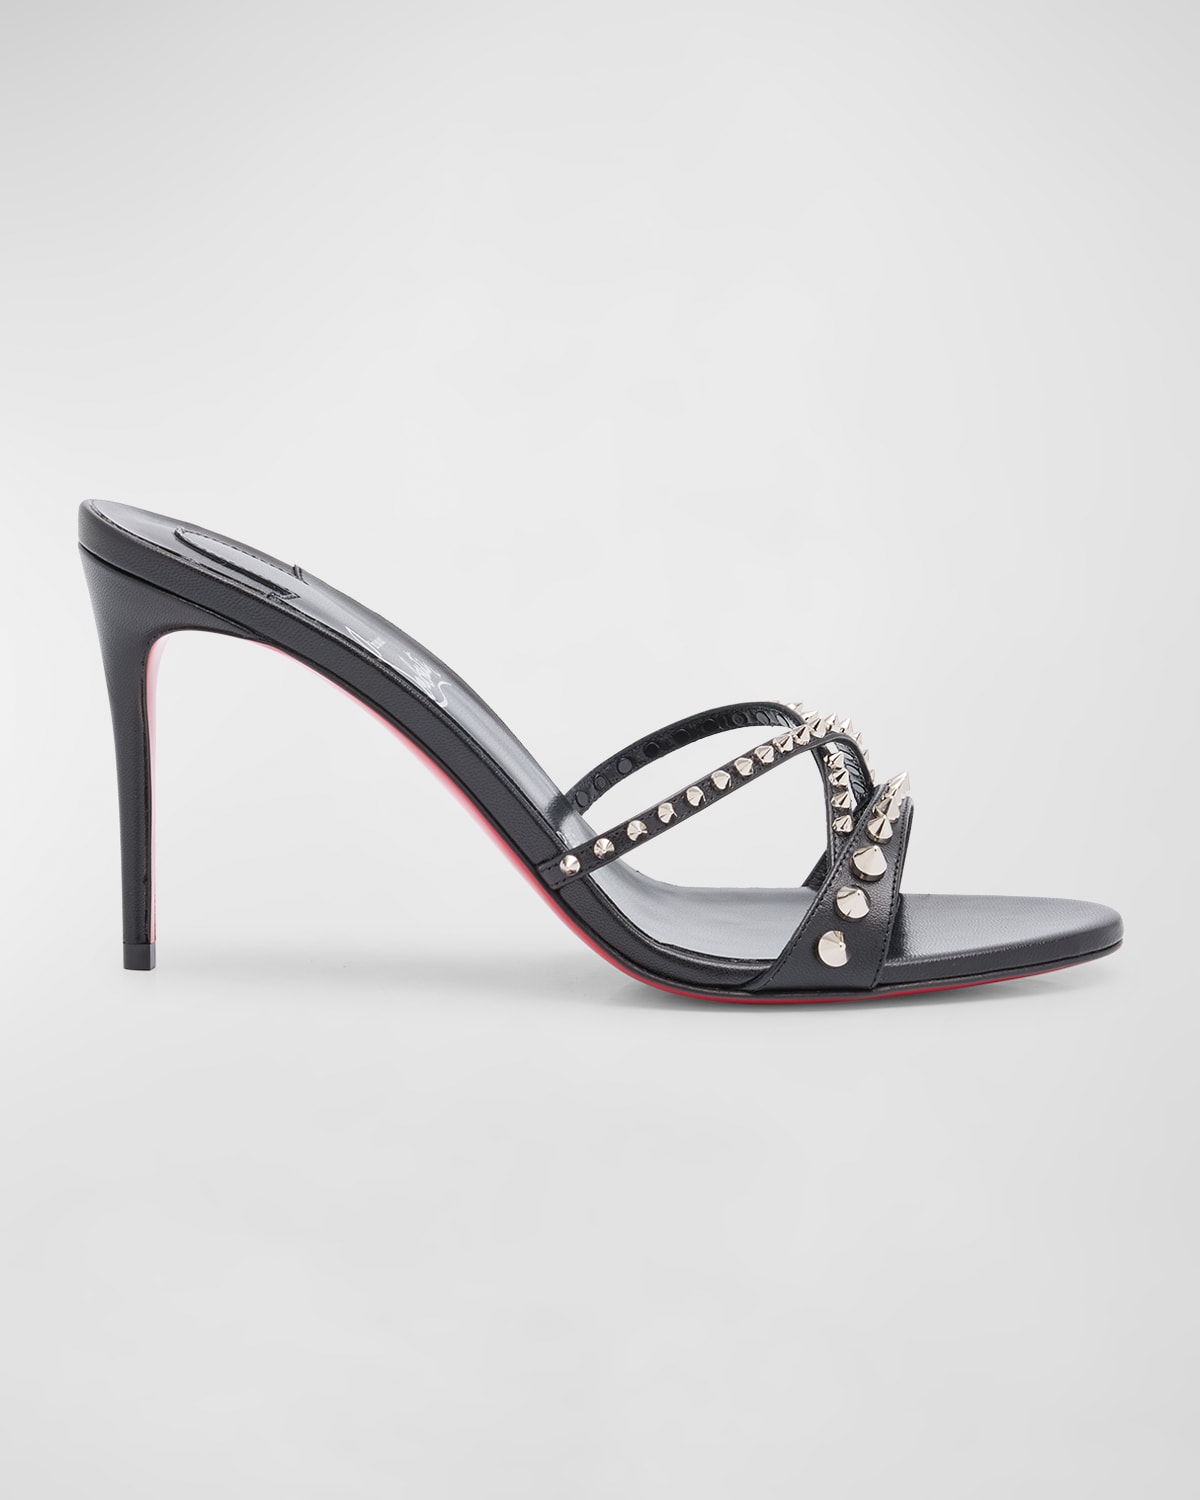 Shop Christian Louboutin Tatoosh Spikes Red Sole Slide Sandals In Black